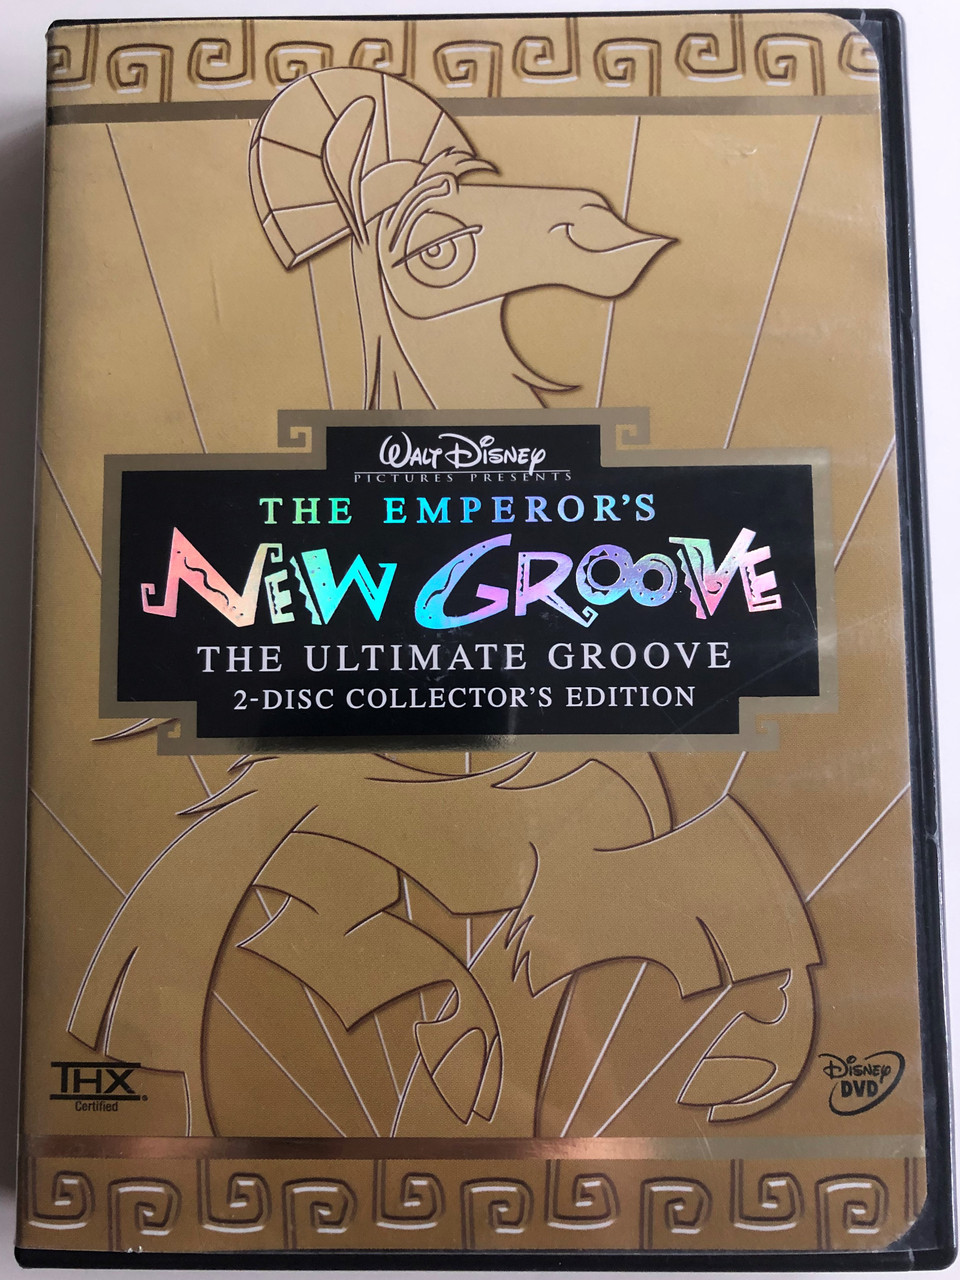 The Emperor's New Groove DVD / The Ultimate Groove / 2-Disc Collector's  Edition / Directed by Mark Dindal / Starring: David Spade, John Goodman,  Eartha Kitt, Patrick Warburton, Wendie Malick / Walt Disney pictures -  bibleinmylanguage